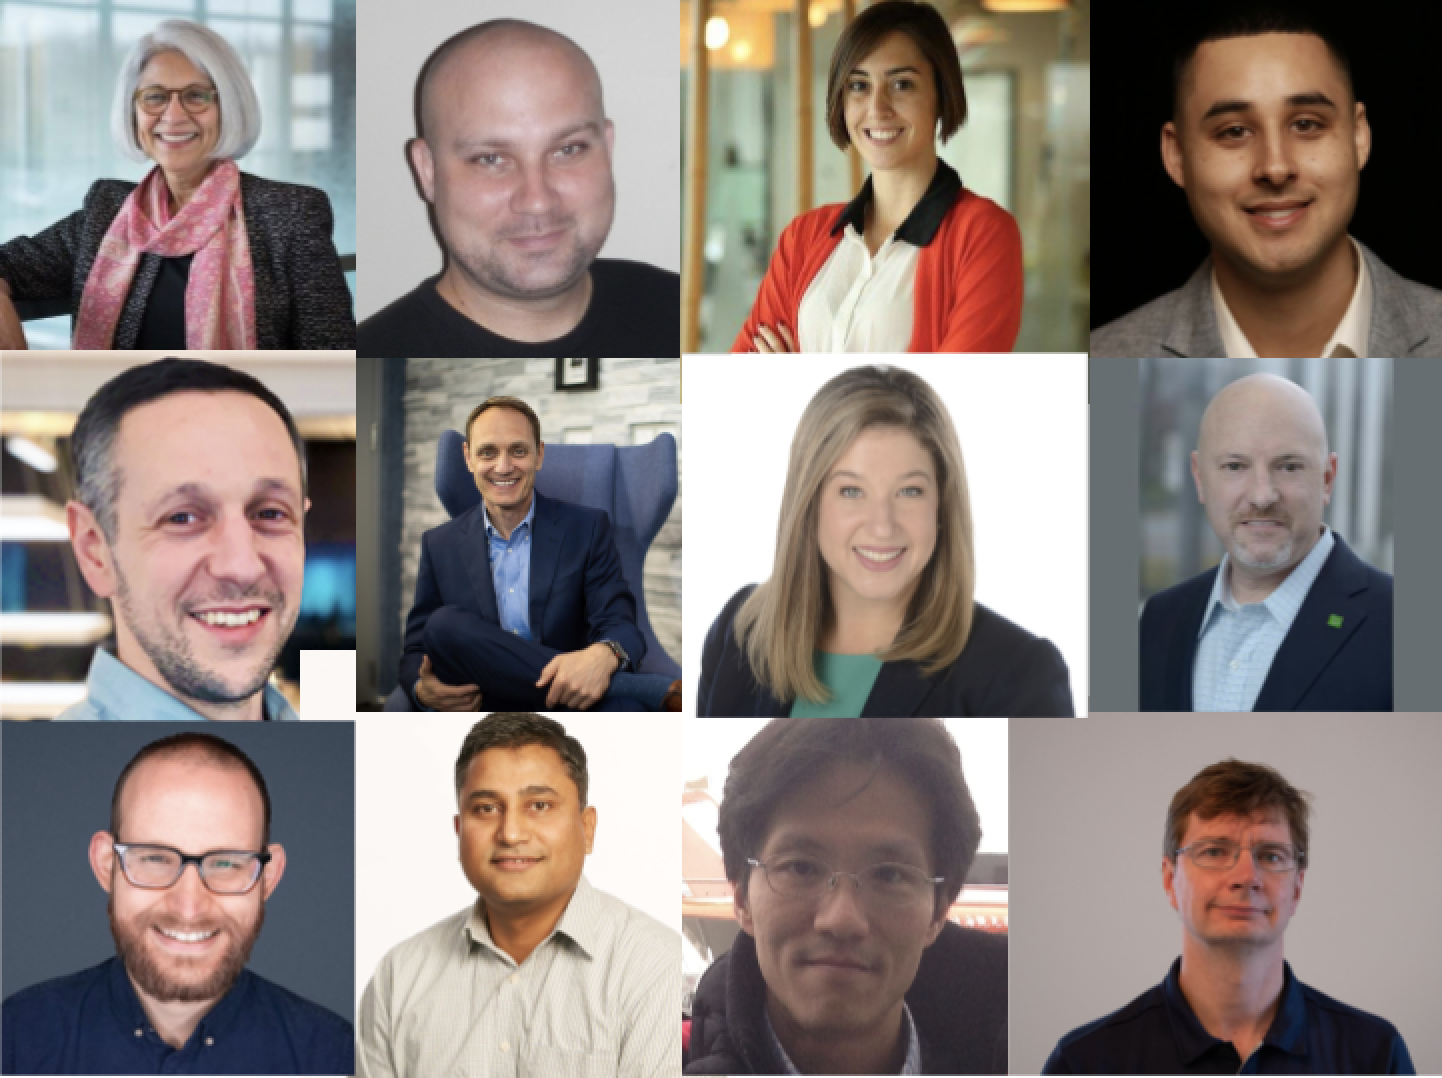 Our 2019 Dev Conference speakers.